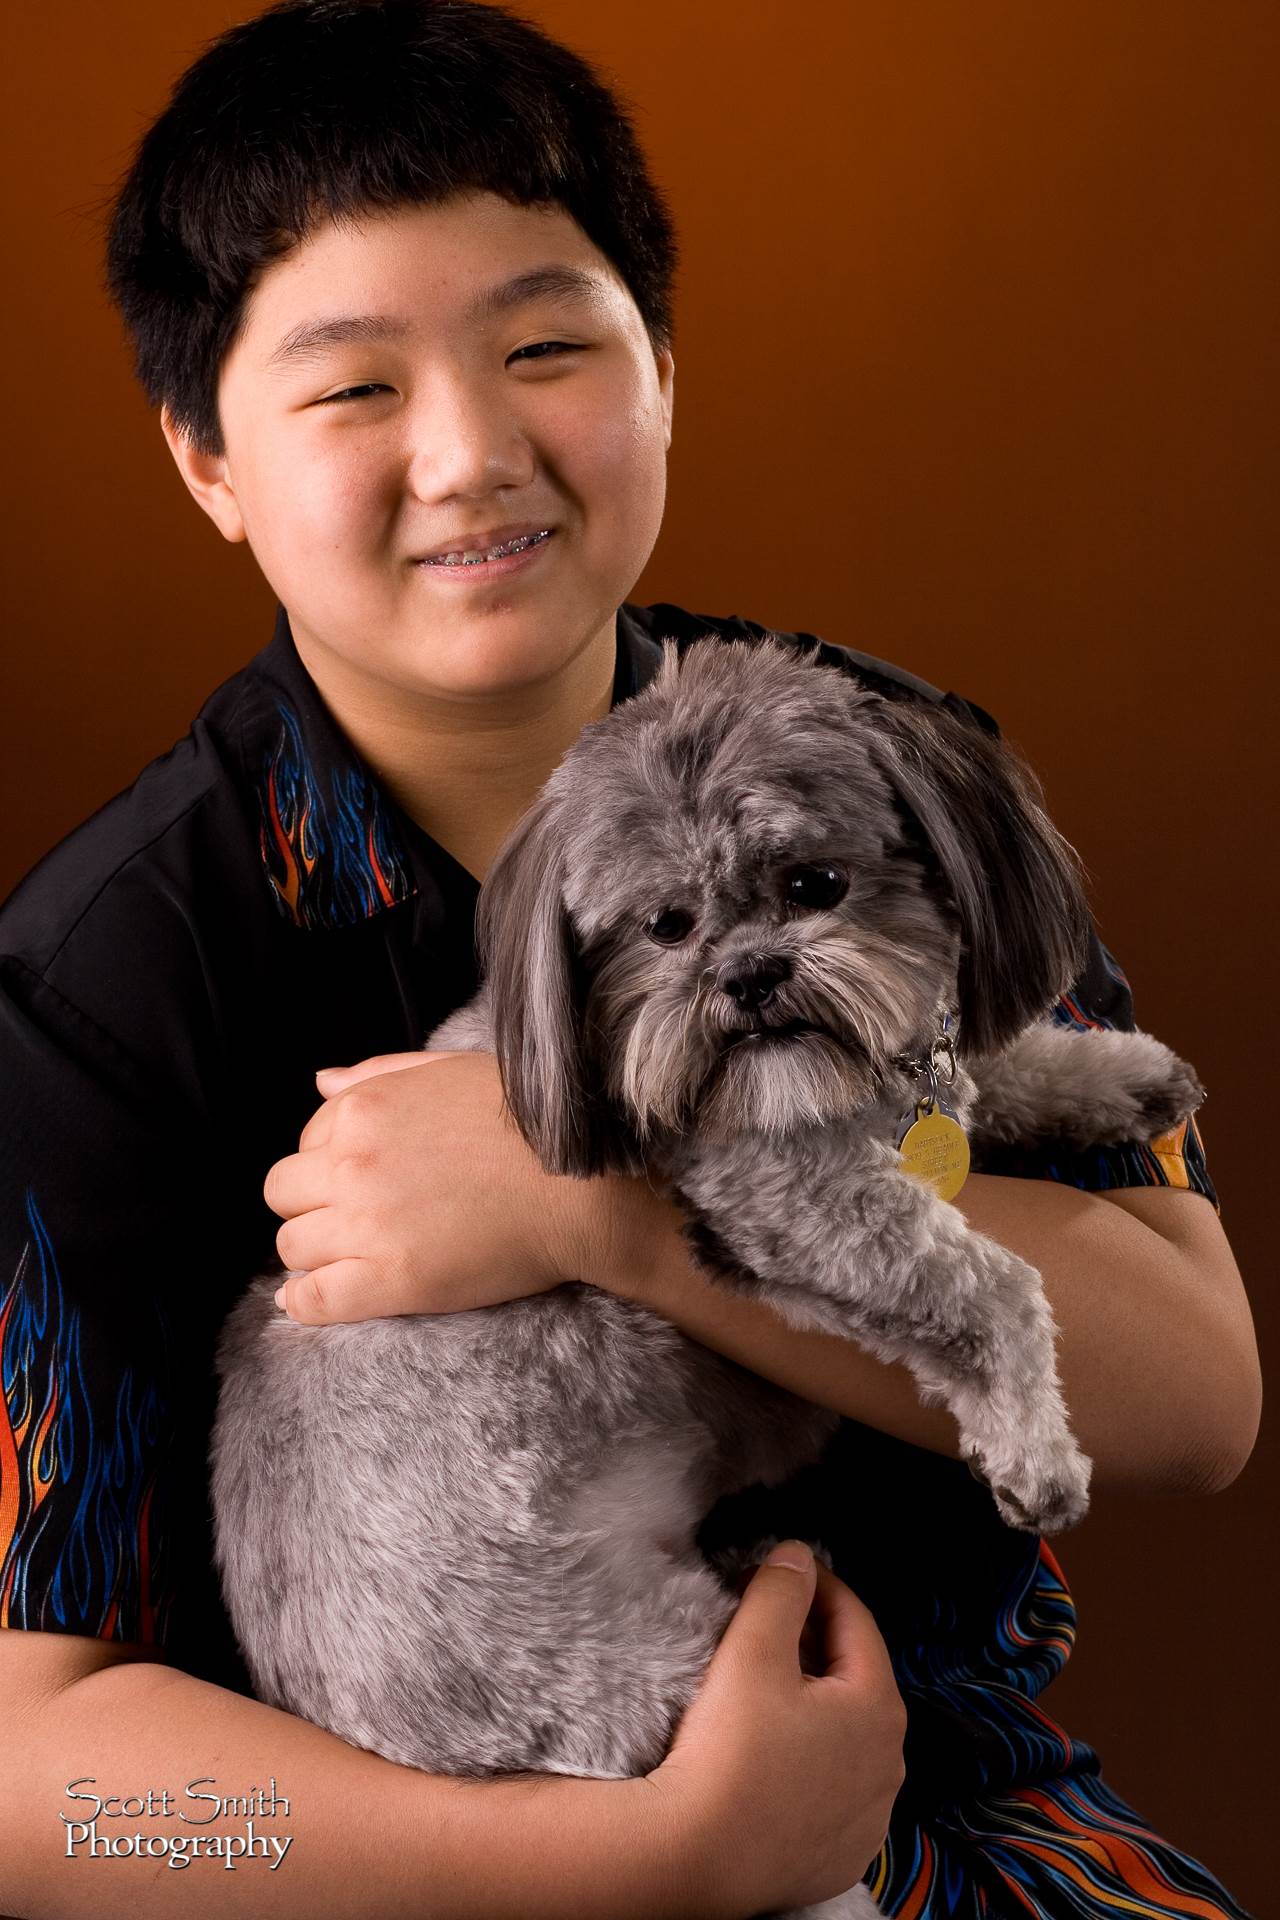 Portrait with Pet - An older photo, from 2007. by Scott Smith Photos